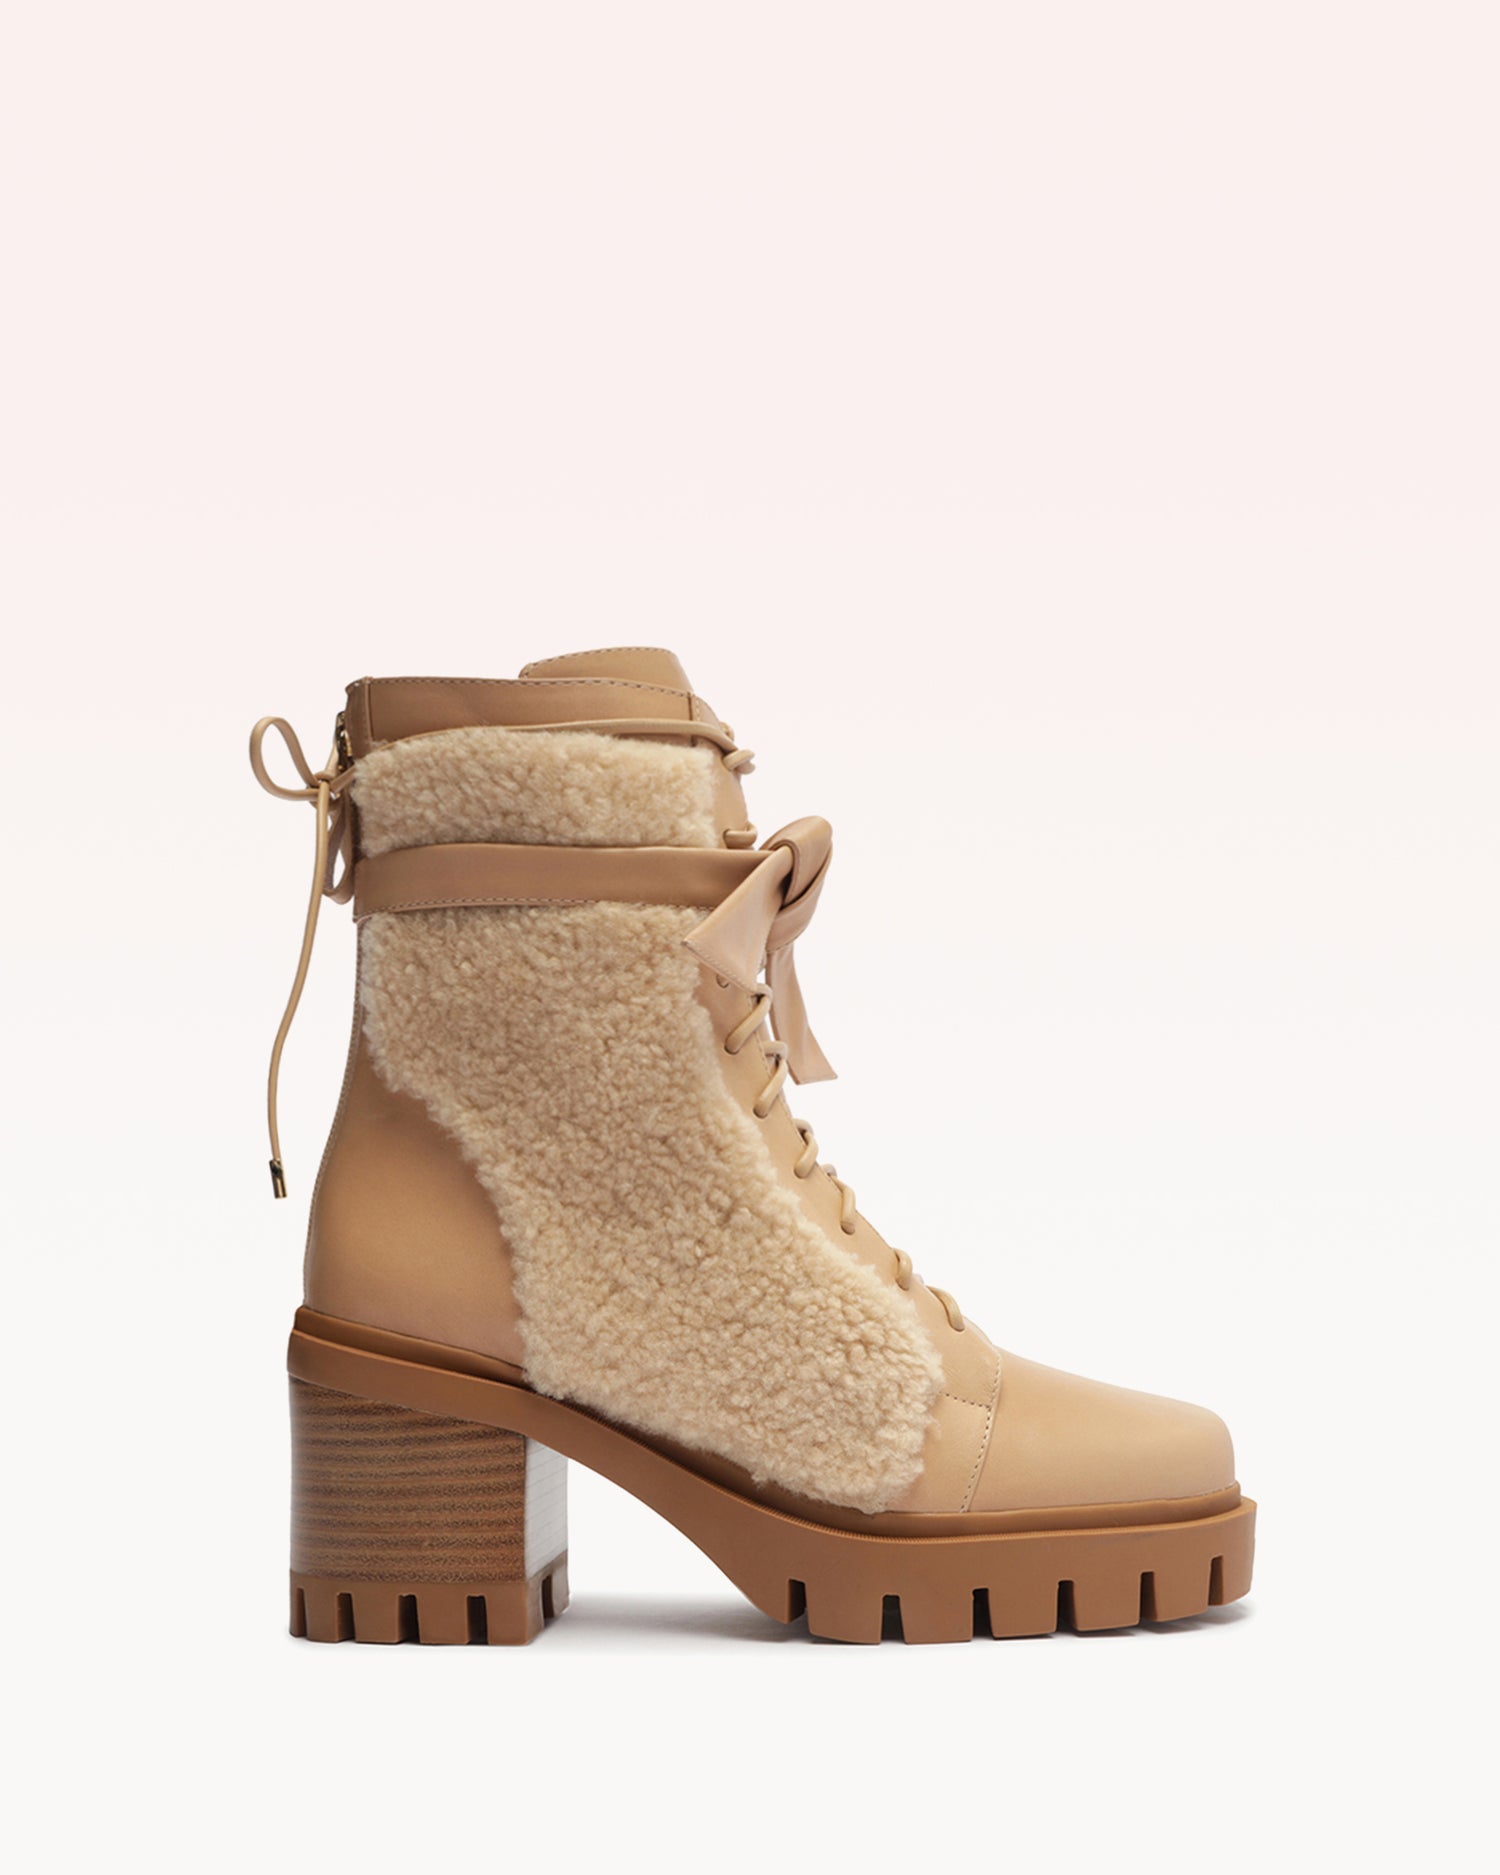 Shearling Clarita Combat Bootie 65 Beige Boots R/23 35 Beige Nappa Elegance & Curly Shearling